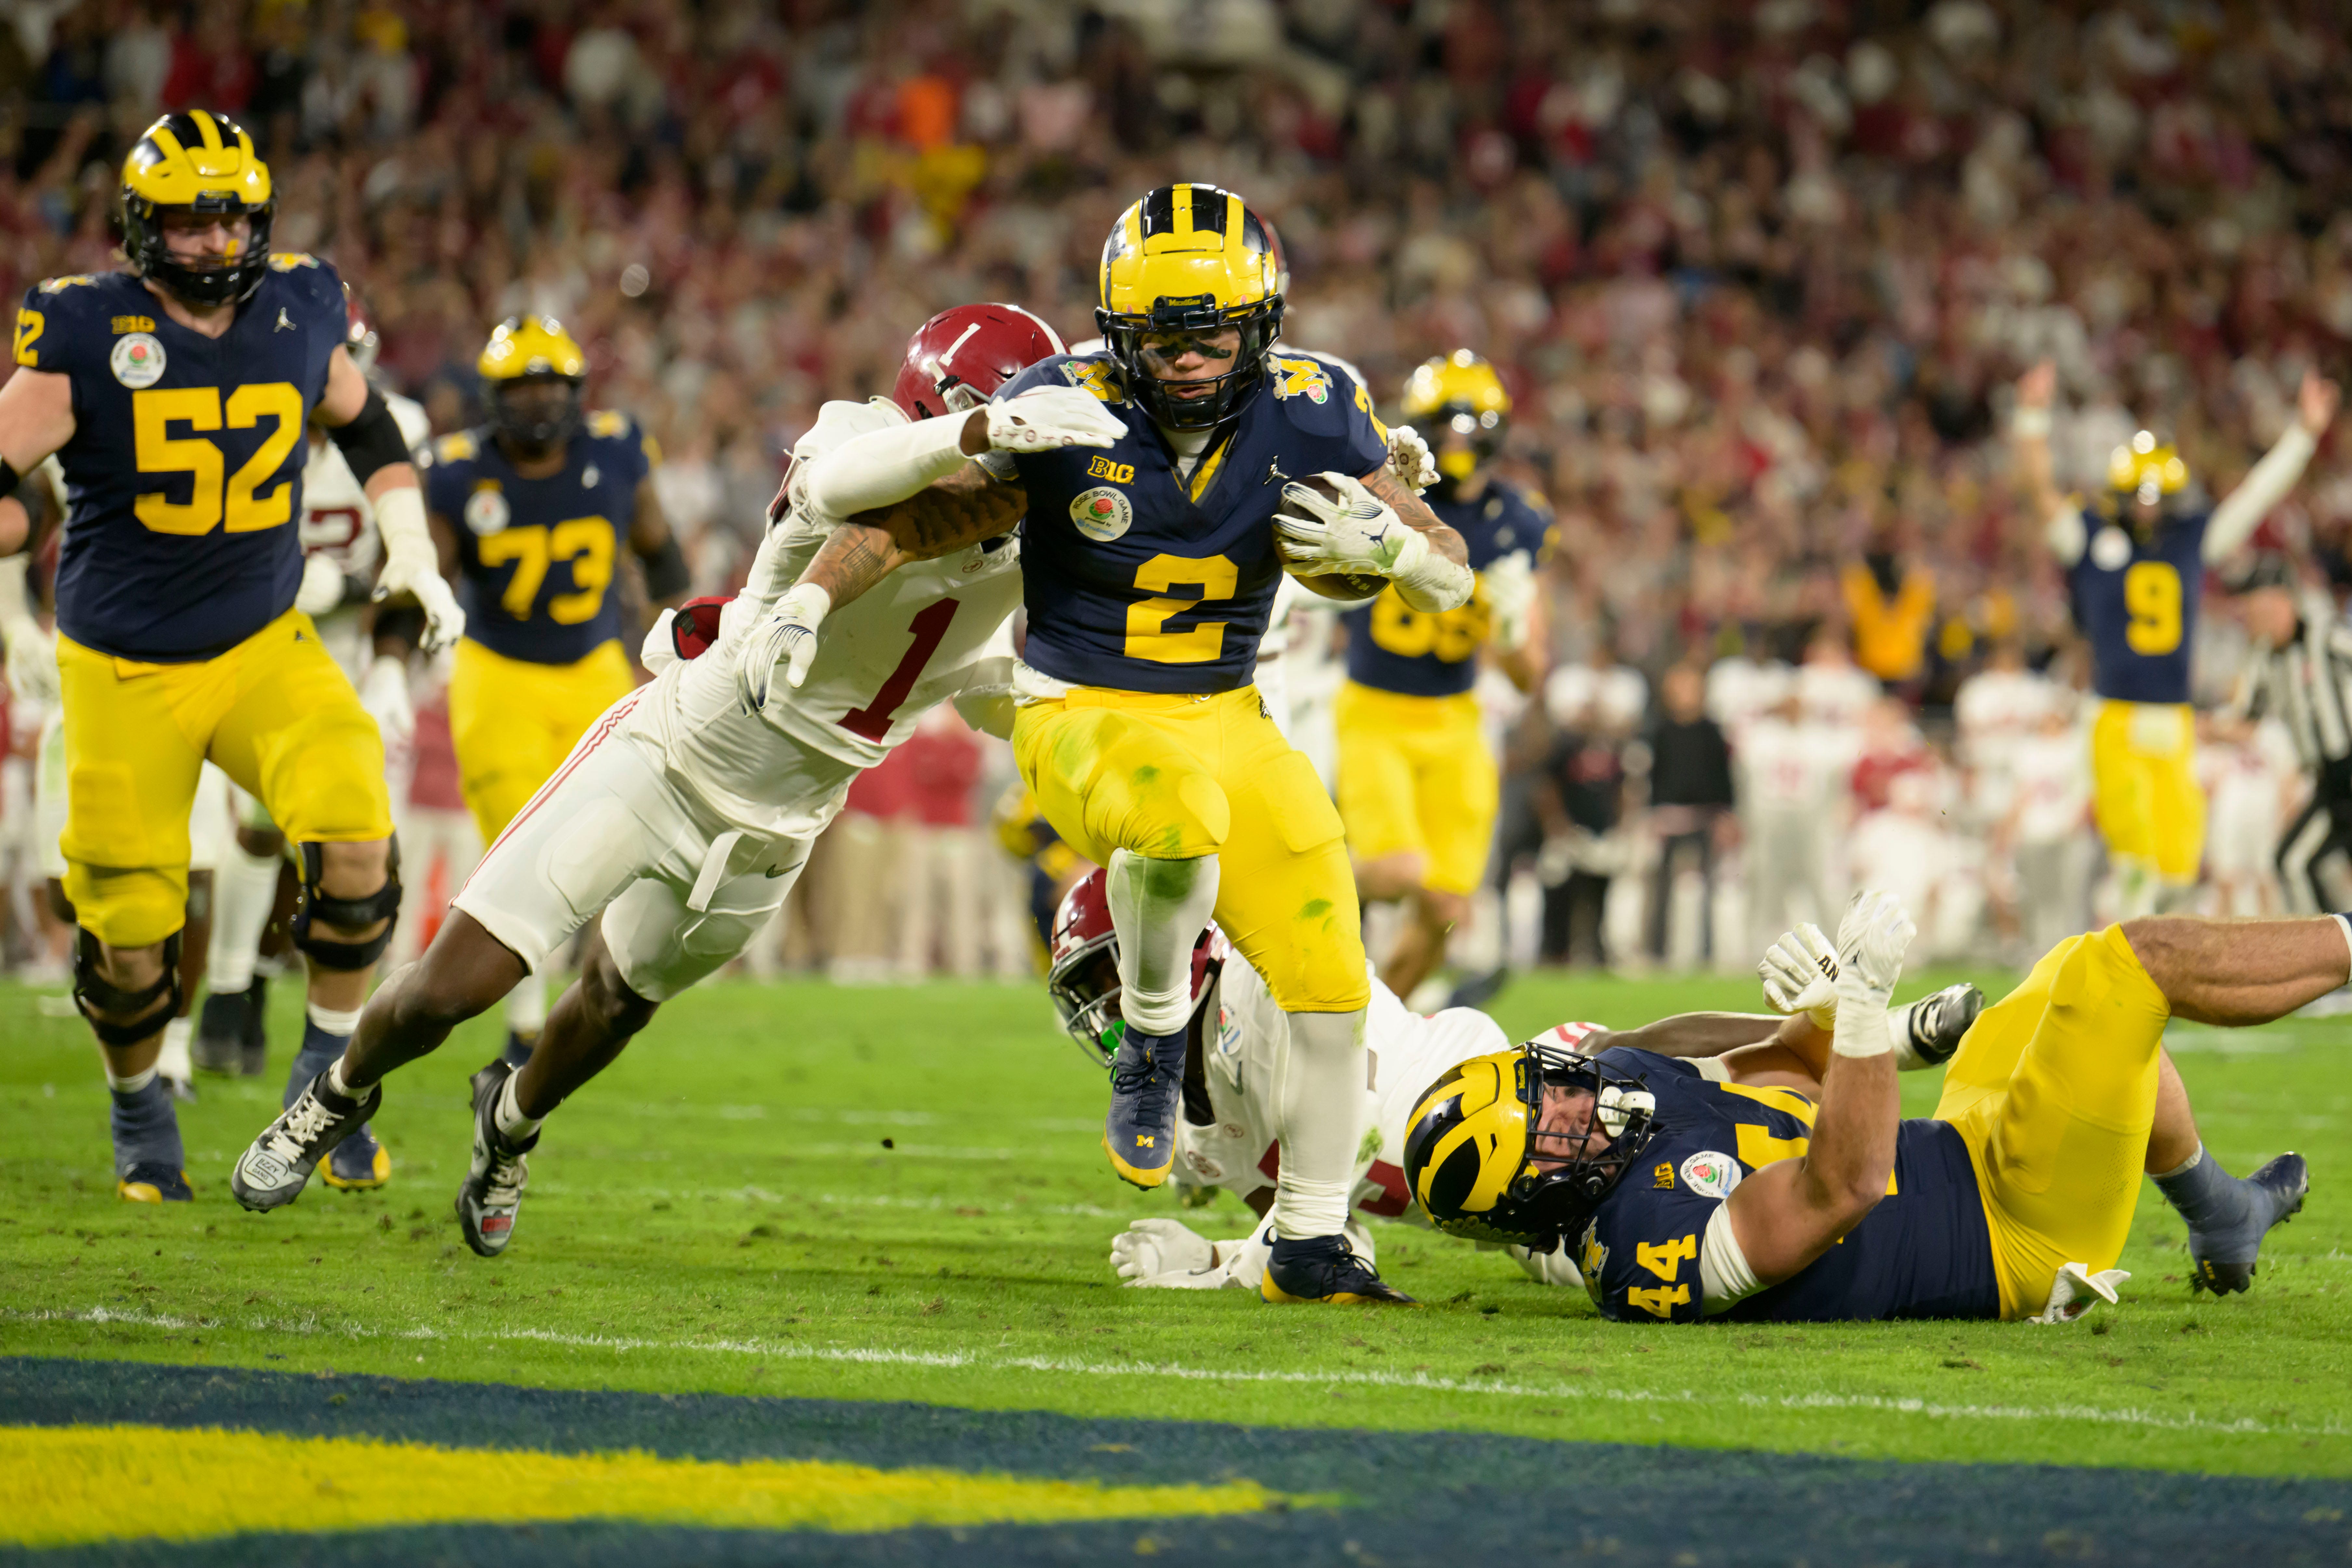 Michigan running back Blake Corum shakes off a tackle by Alabama defensive back Kool-Aid McKinstry to score the game winning touchdown during the overtime period of the Rose Bowl, in Pasadena, California, January 1, 2024.